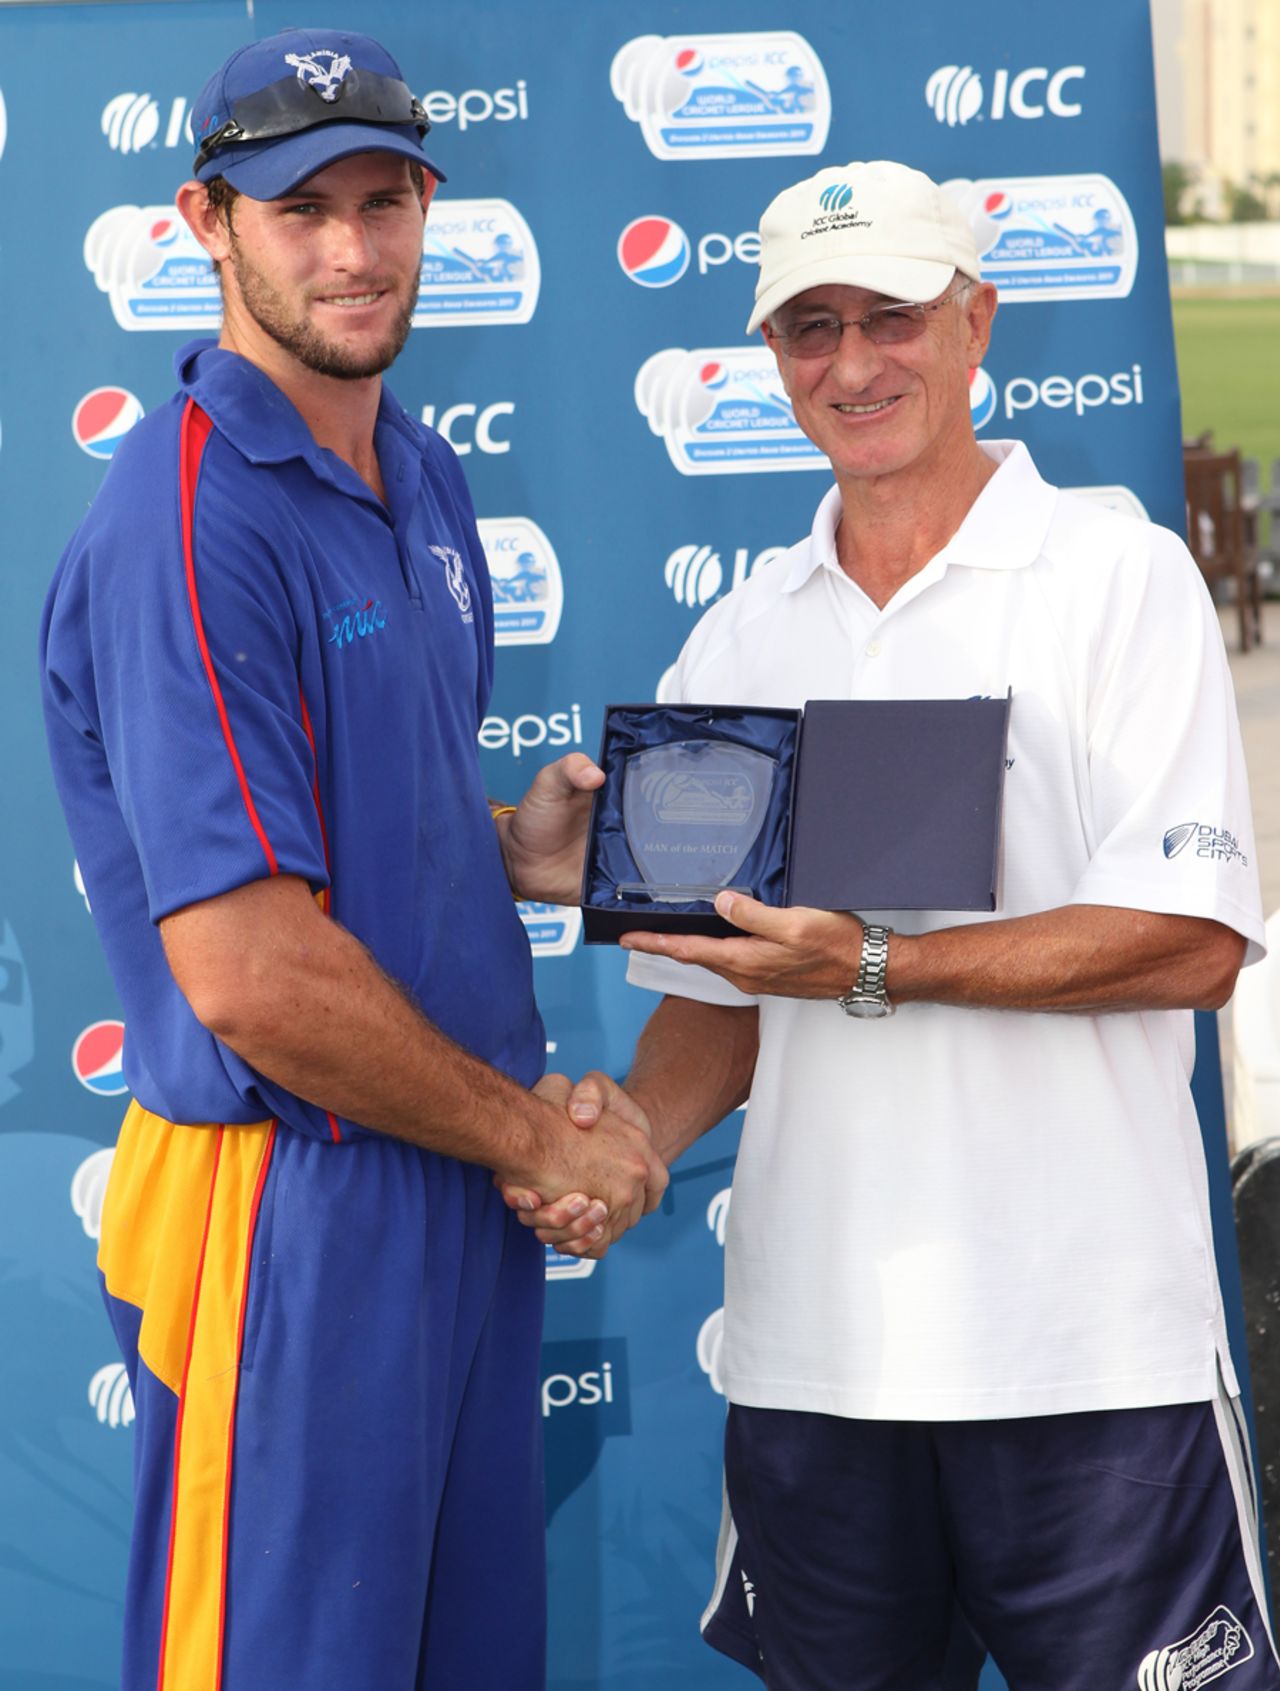 Louis Klazinga receives his Man of the Match Award from former New Zealand international Dayle Hadlee after taking 5-50 against Hong Kong at the ICC WCL2 in Dubai on 14th April 2011